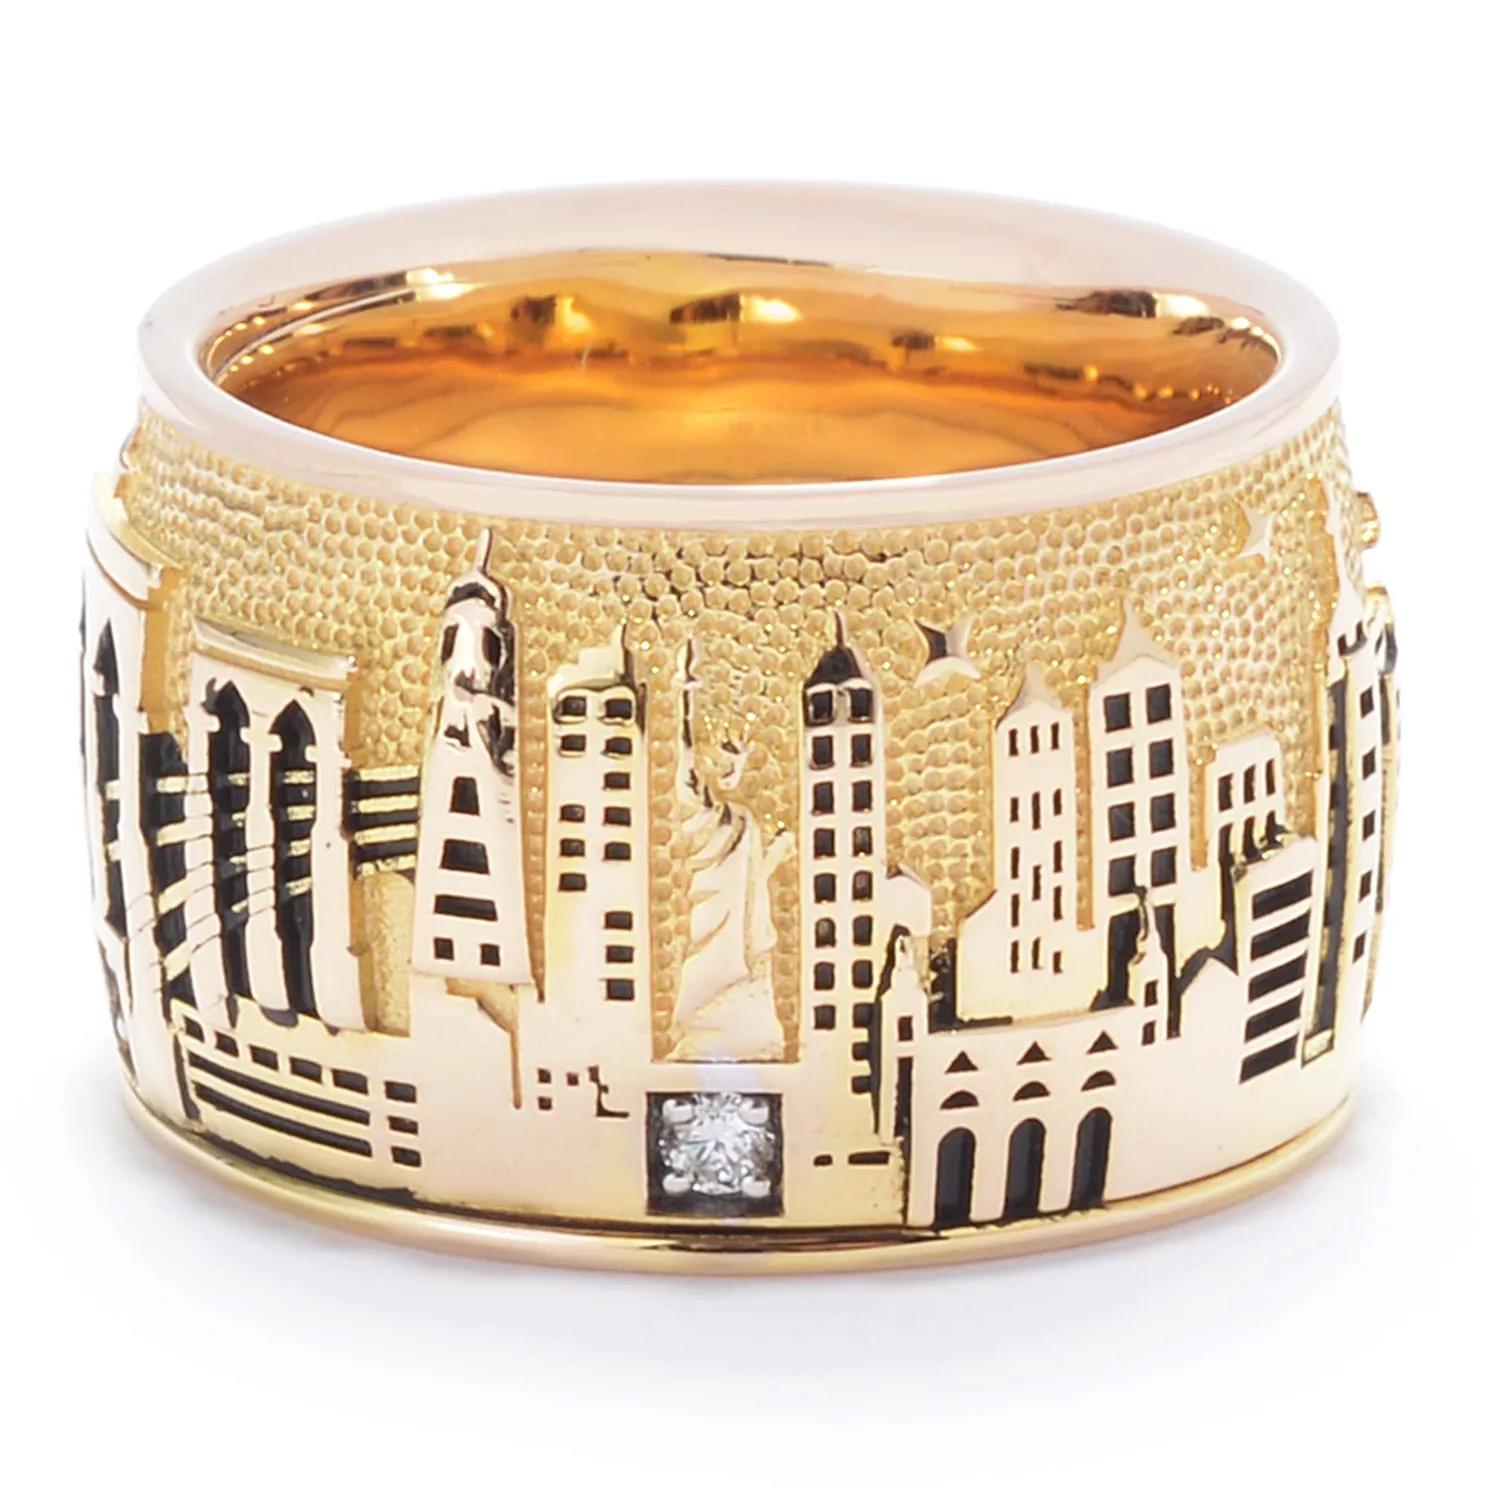 Carry the iconic New York City skyline with you wherever you wander! Crafted in 14K gold, this ring boasts an elaborately embossed design of the Big Apple's majestic skyscrapers. Three sparkling diamonds are gracefully scattered along the bottom